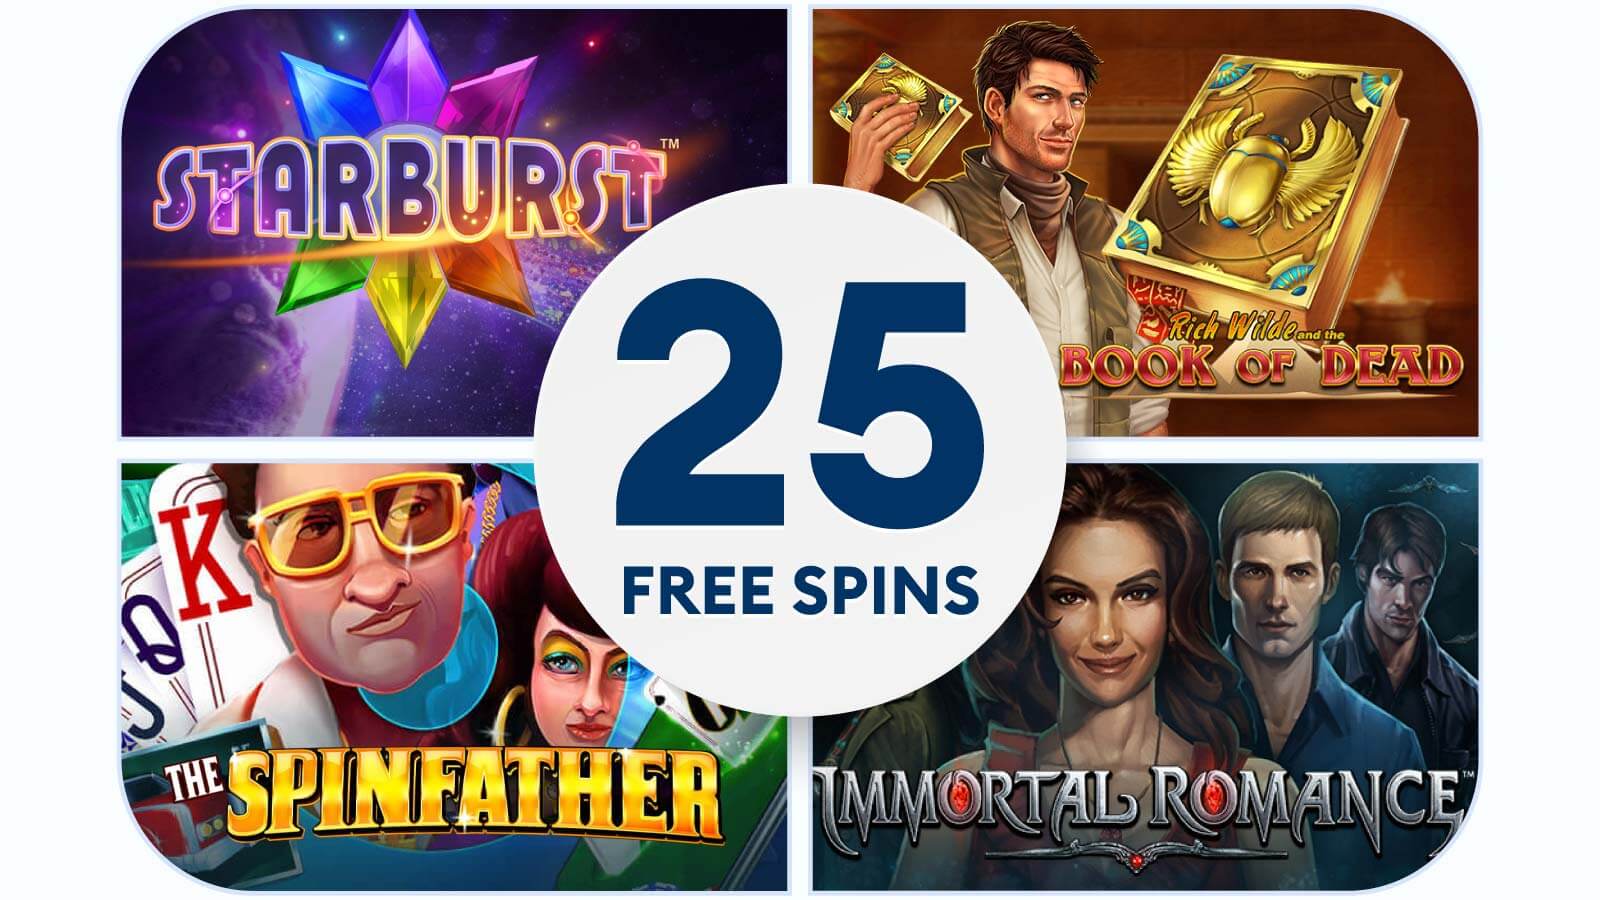 Top Games to Play with 25 Free Spins